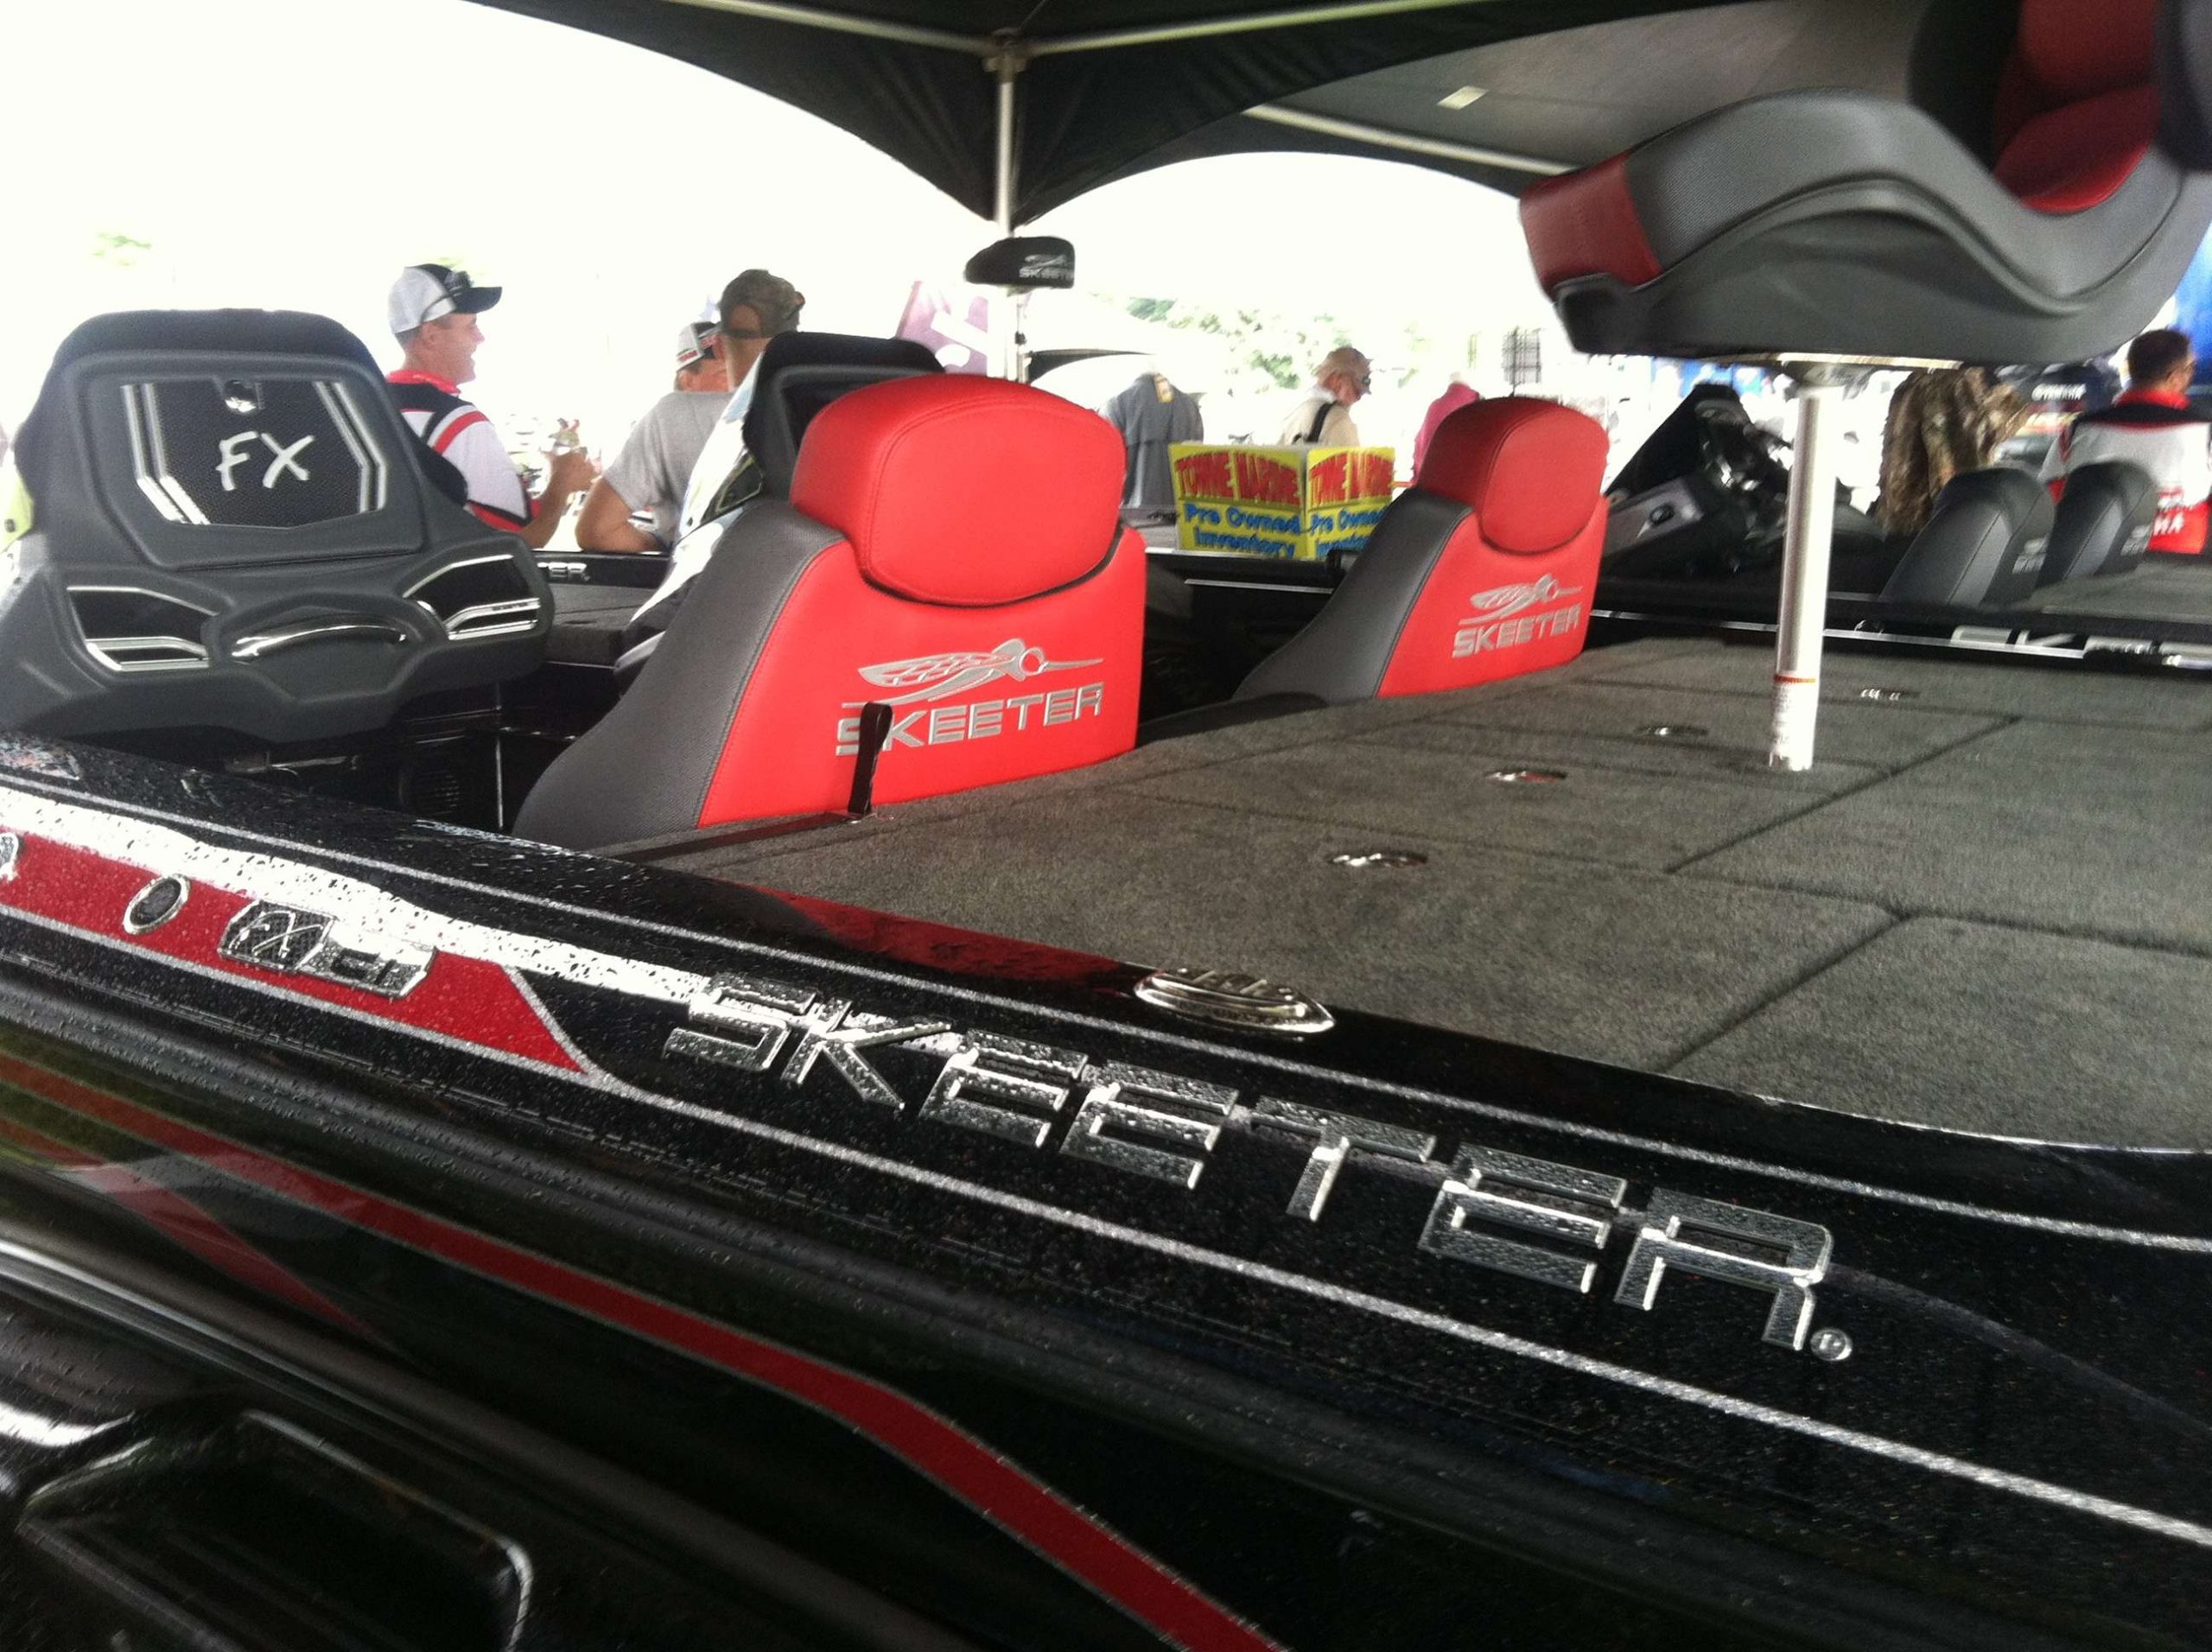 Skeeter boat on hand to check out. 